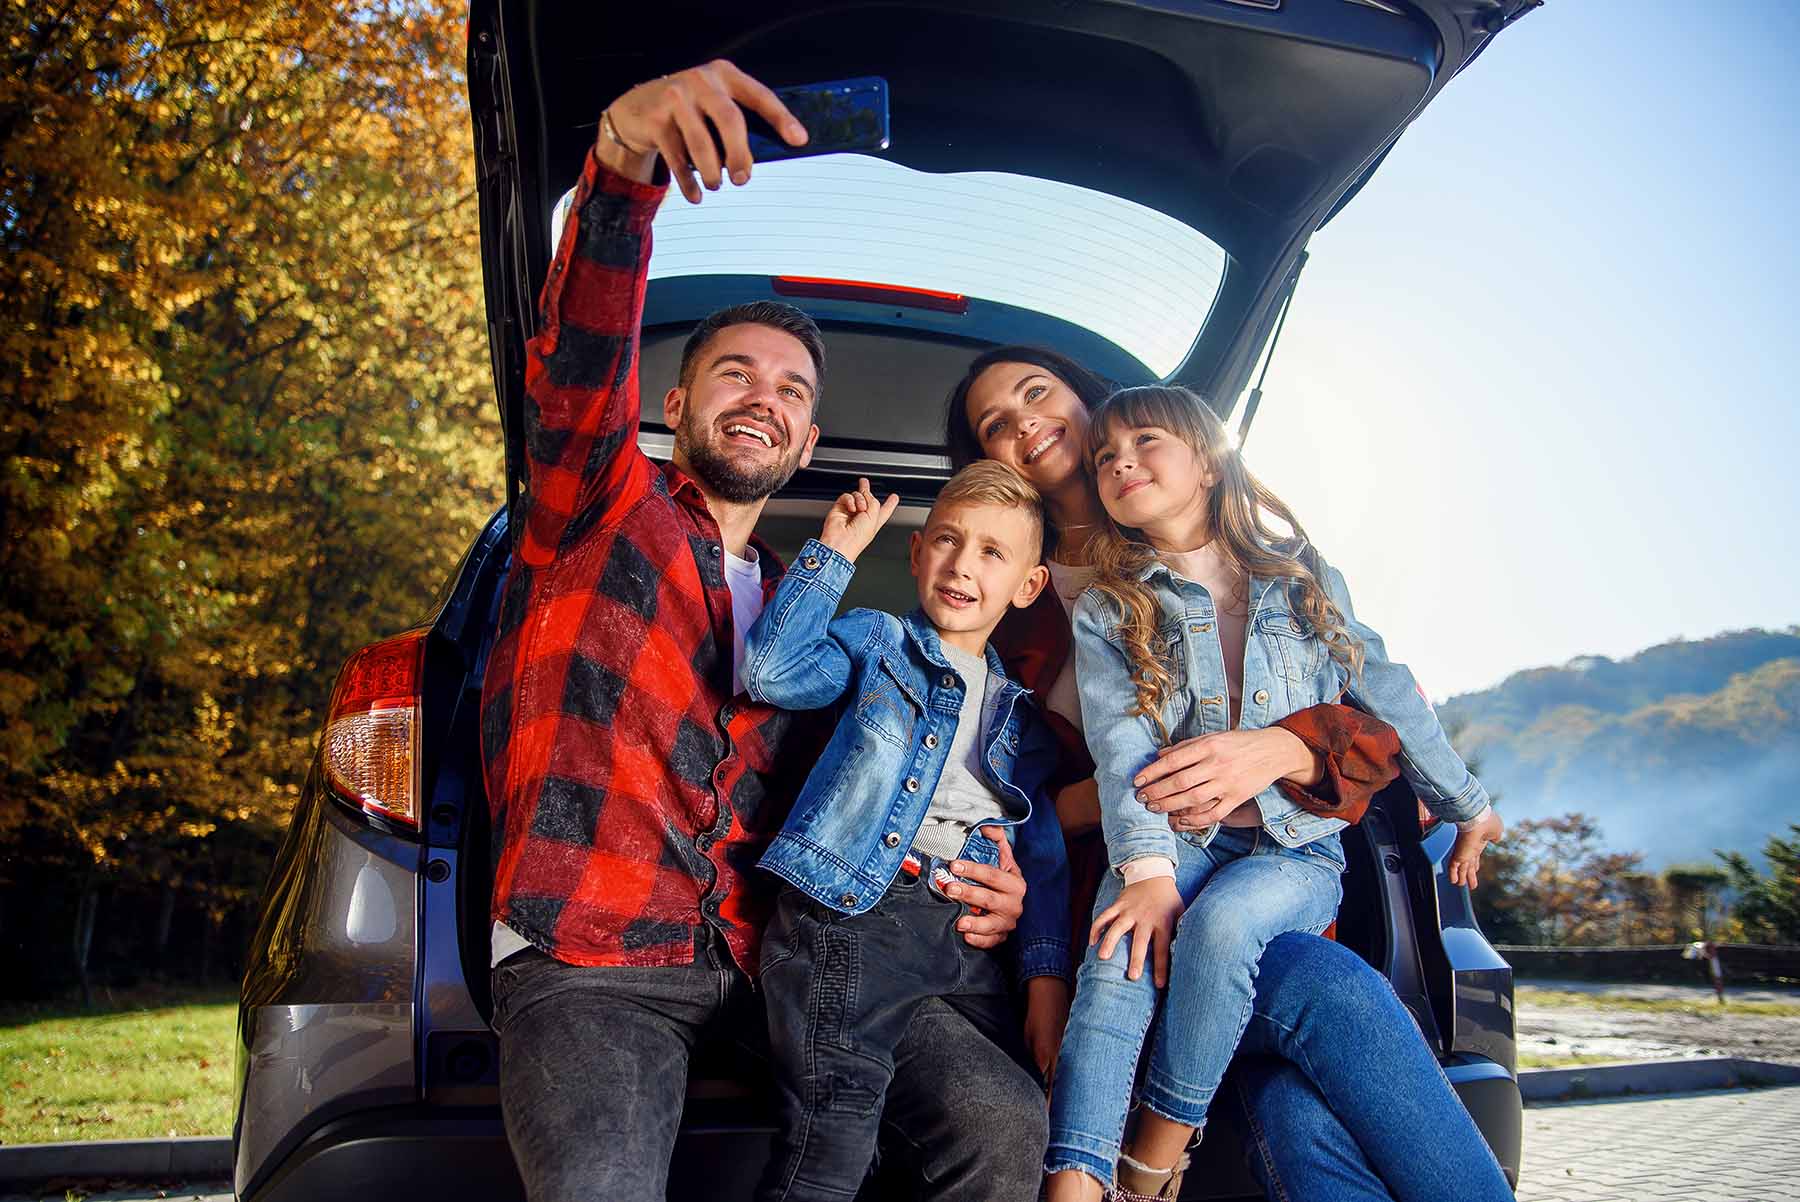 Cute family on roadtrip taking a selfie in the back of the car.